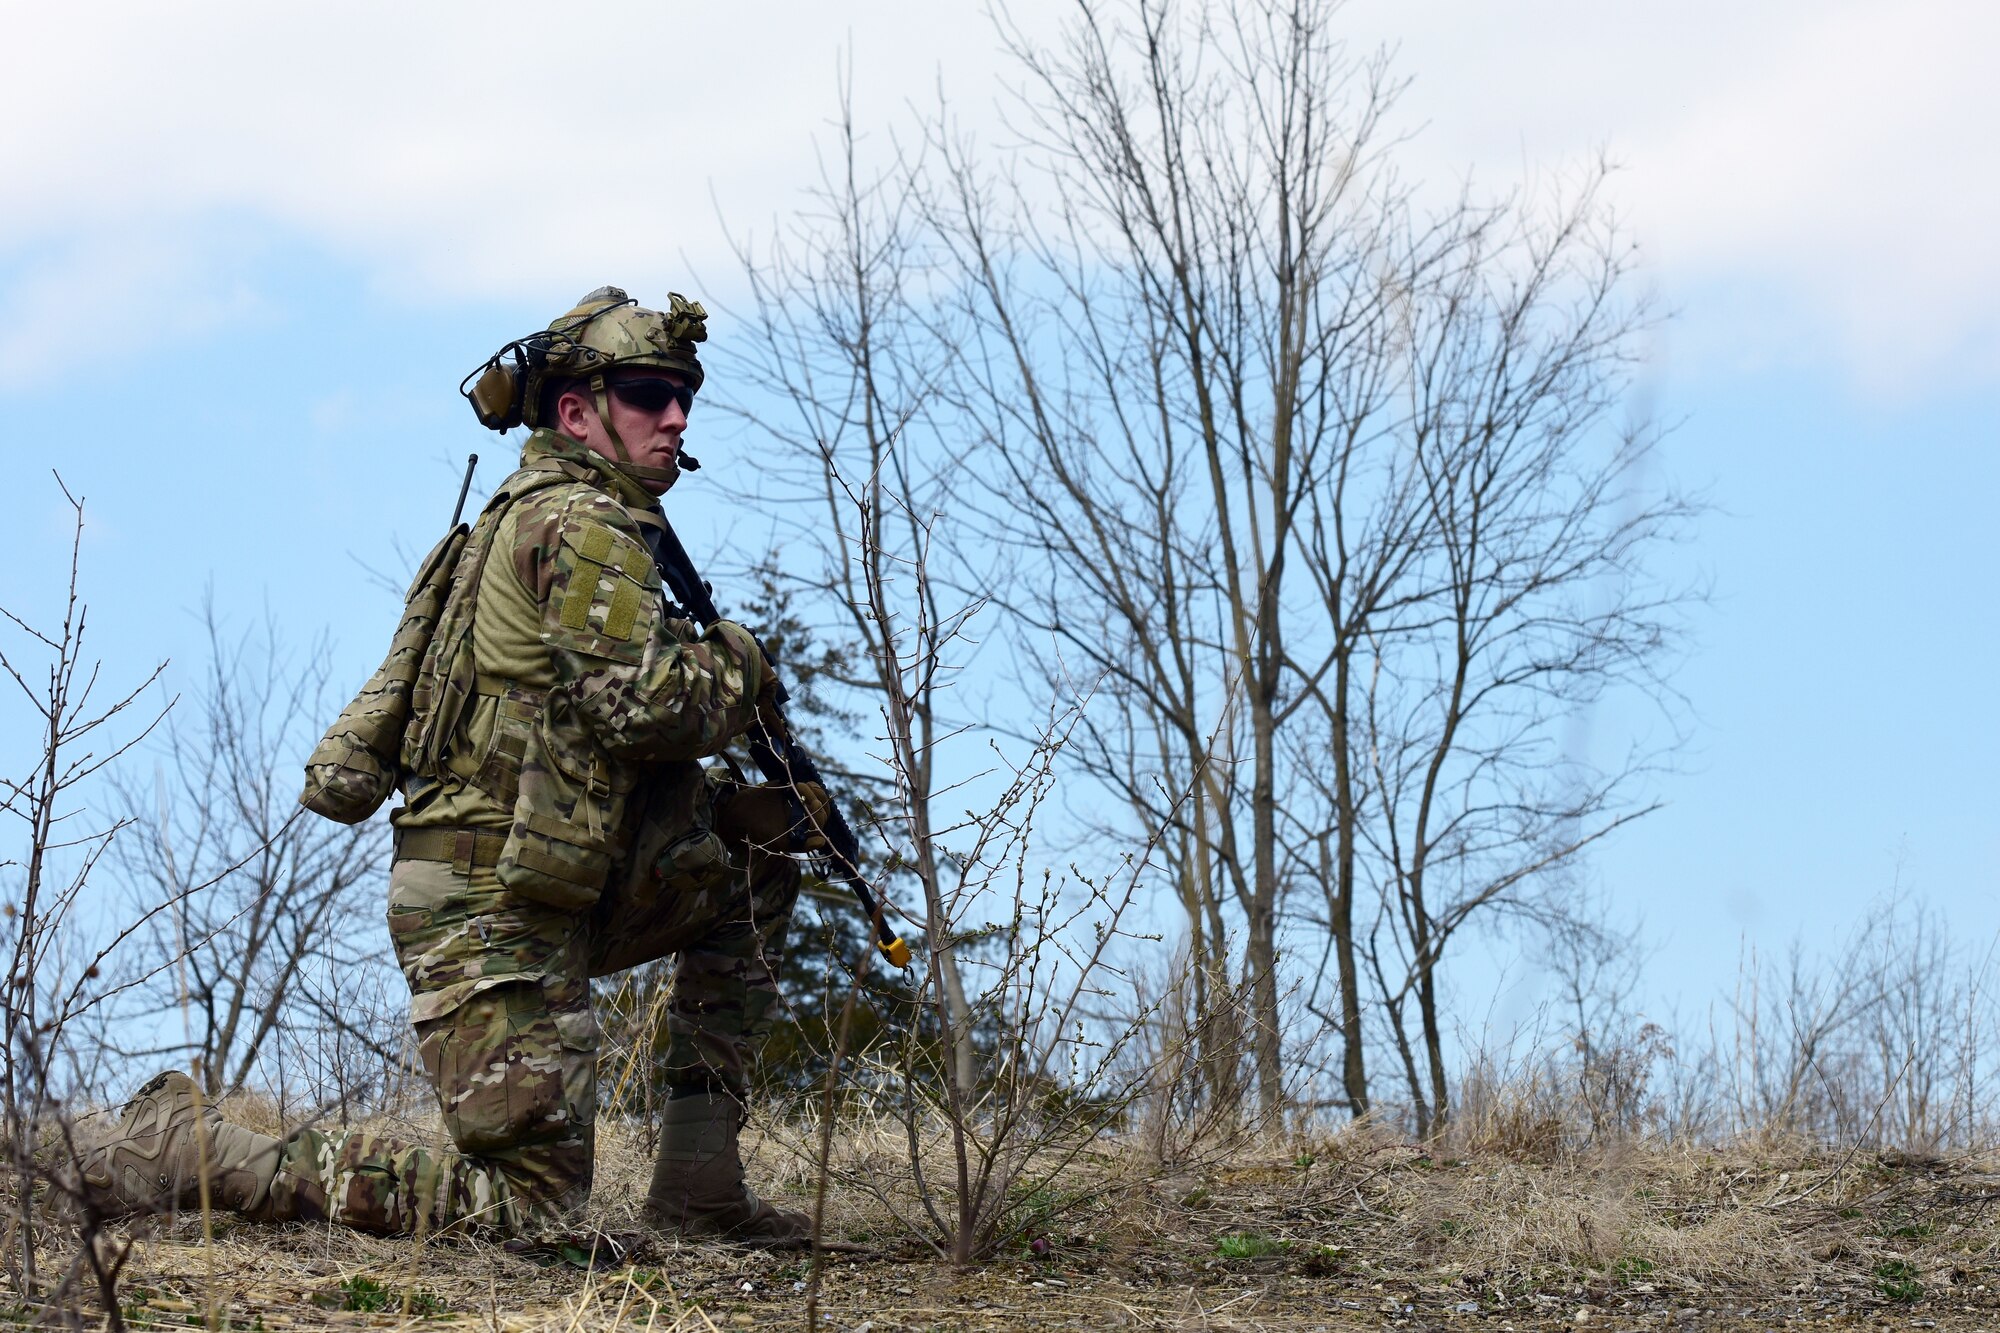 Senior Airman Lucas Morrison, 148th Air Support Operations Squadron, 193rd Special Operations Wing, participates in a Tactical Combat Casualty Care Field Training Exercise April 6, 2019, at Fort Indiantown Gap, Annville, Pennsylvania. Morrison and fellow Airmen participating in the FTX completed three different timed scenarios in which they moved tactically through a series of unpredicted “ambushes.” (U.S. Air National Guard photo by Staff Sgt. Rachel Loftis)